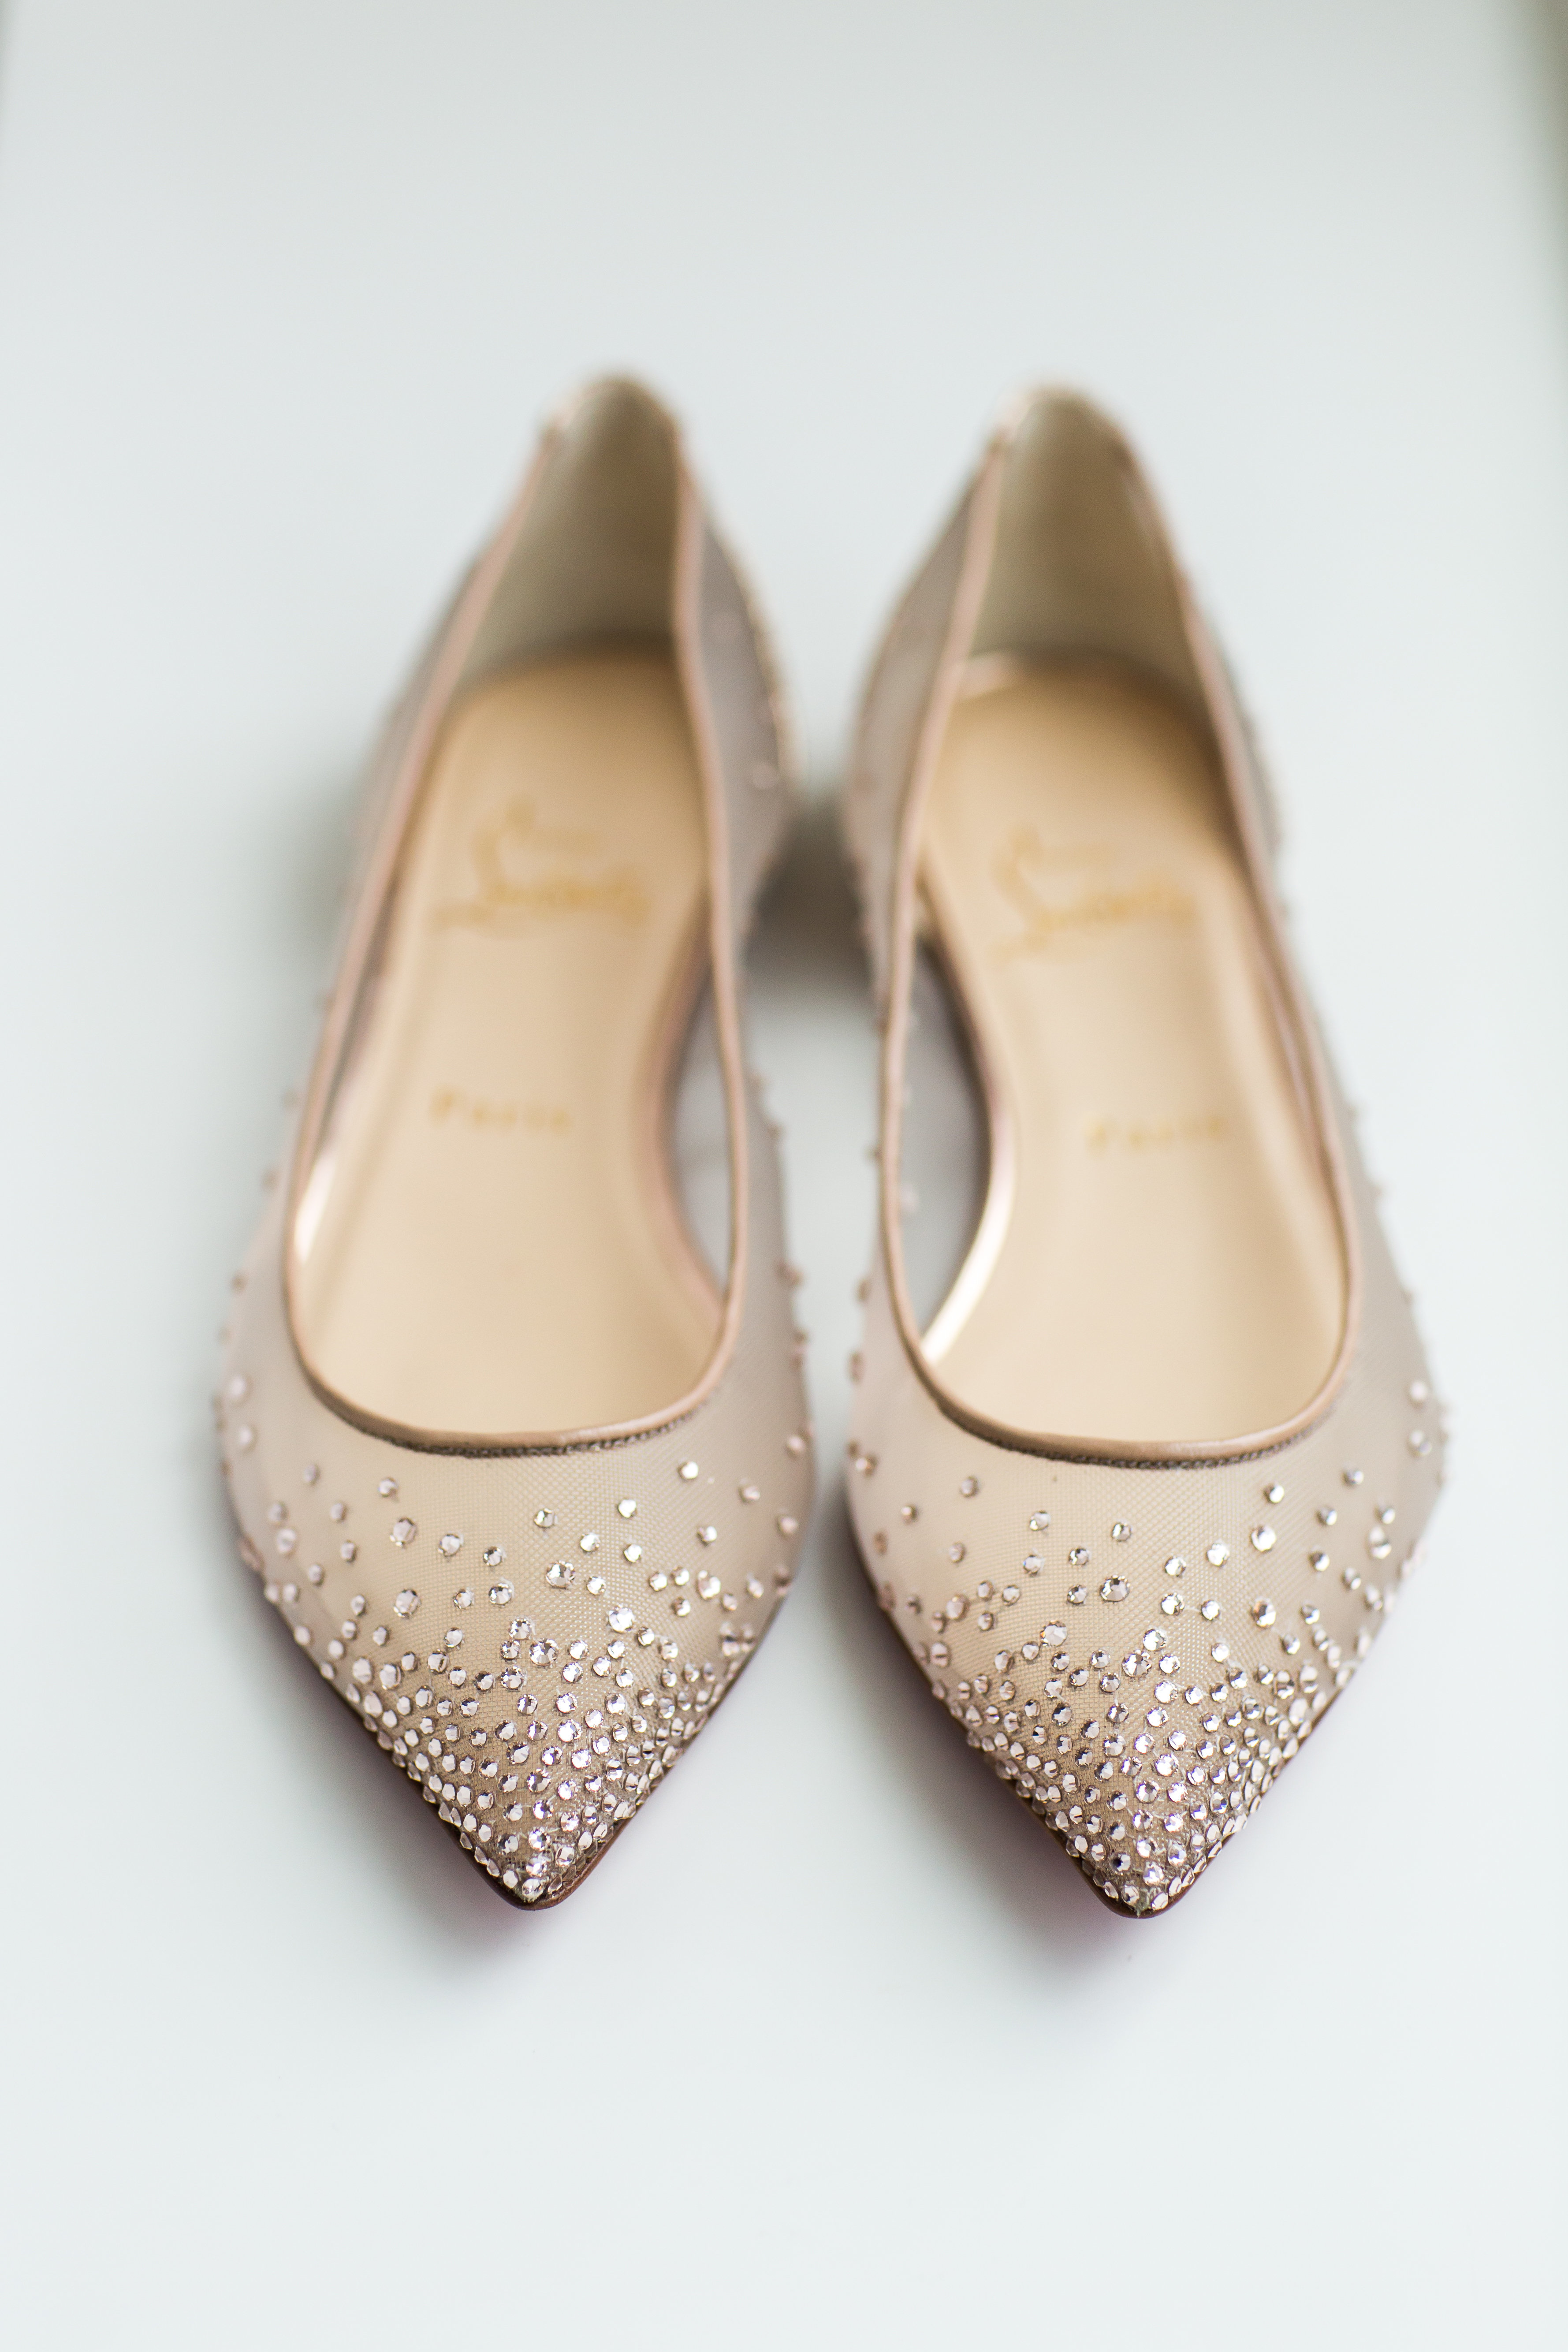 26 Comfy Wedding Shoes For Brides Who 